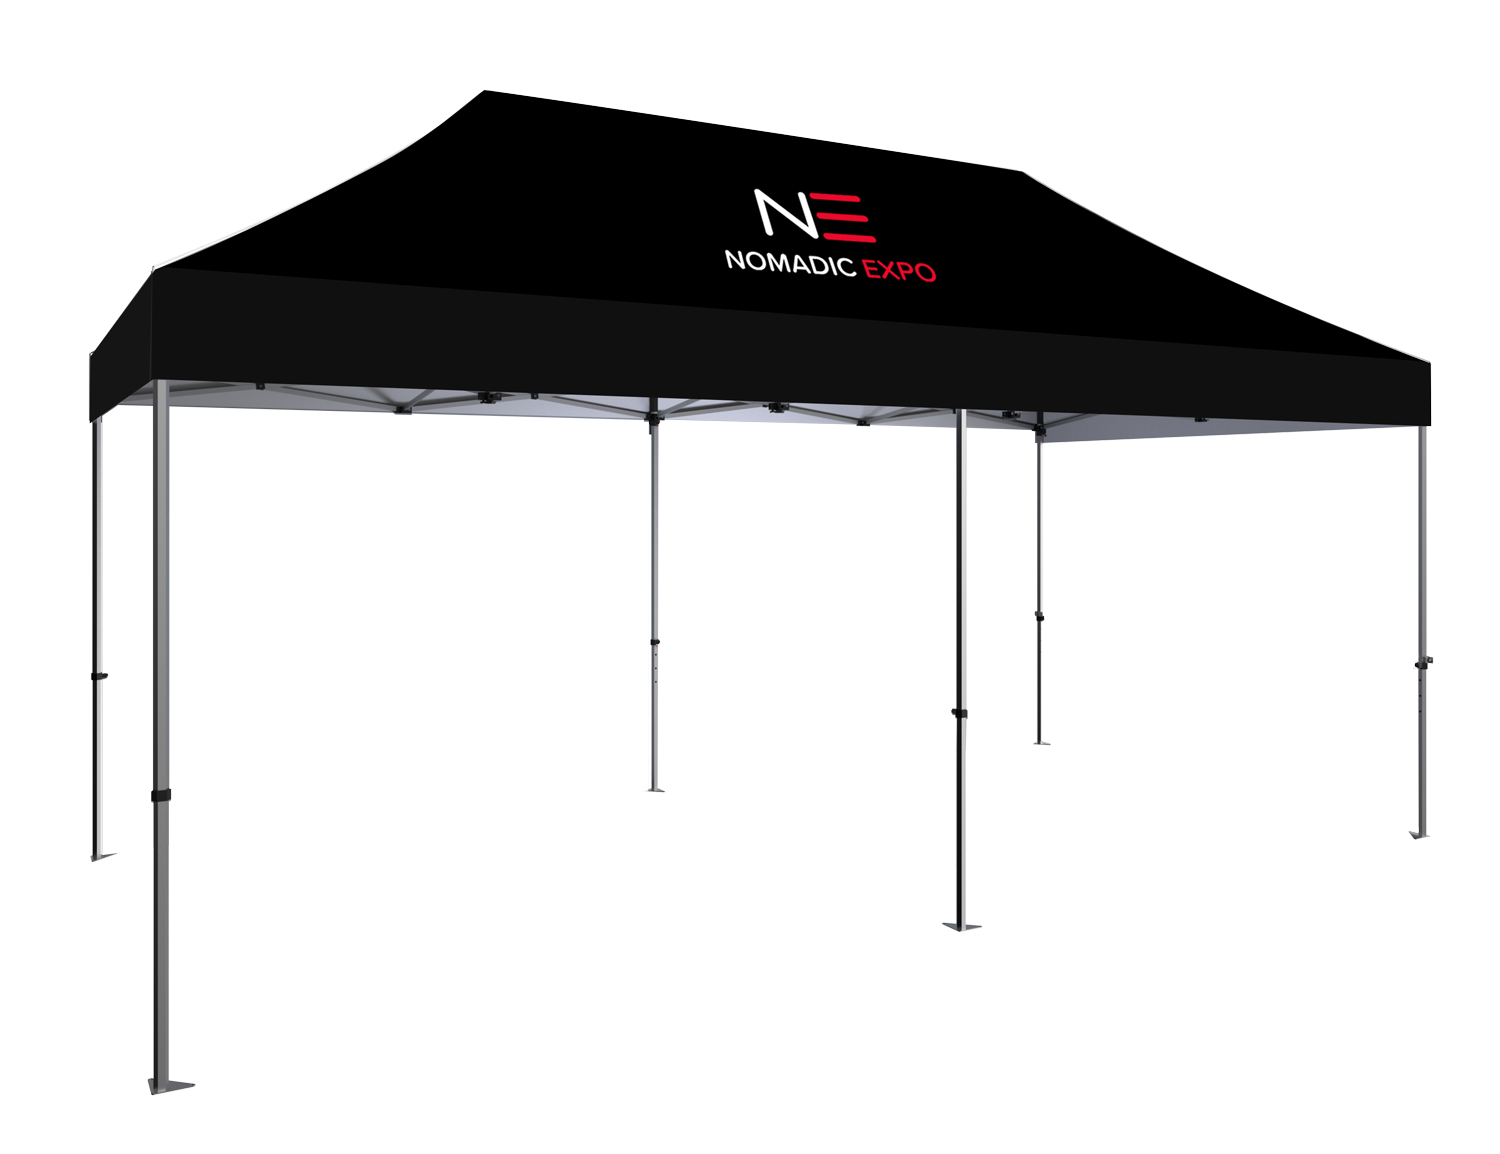 Promotional tents and umbrellas